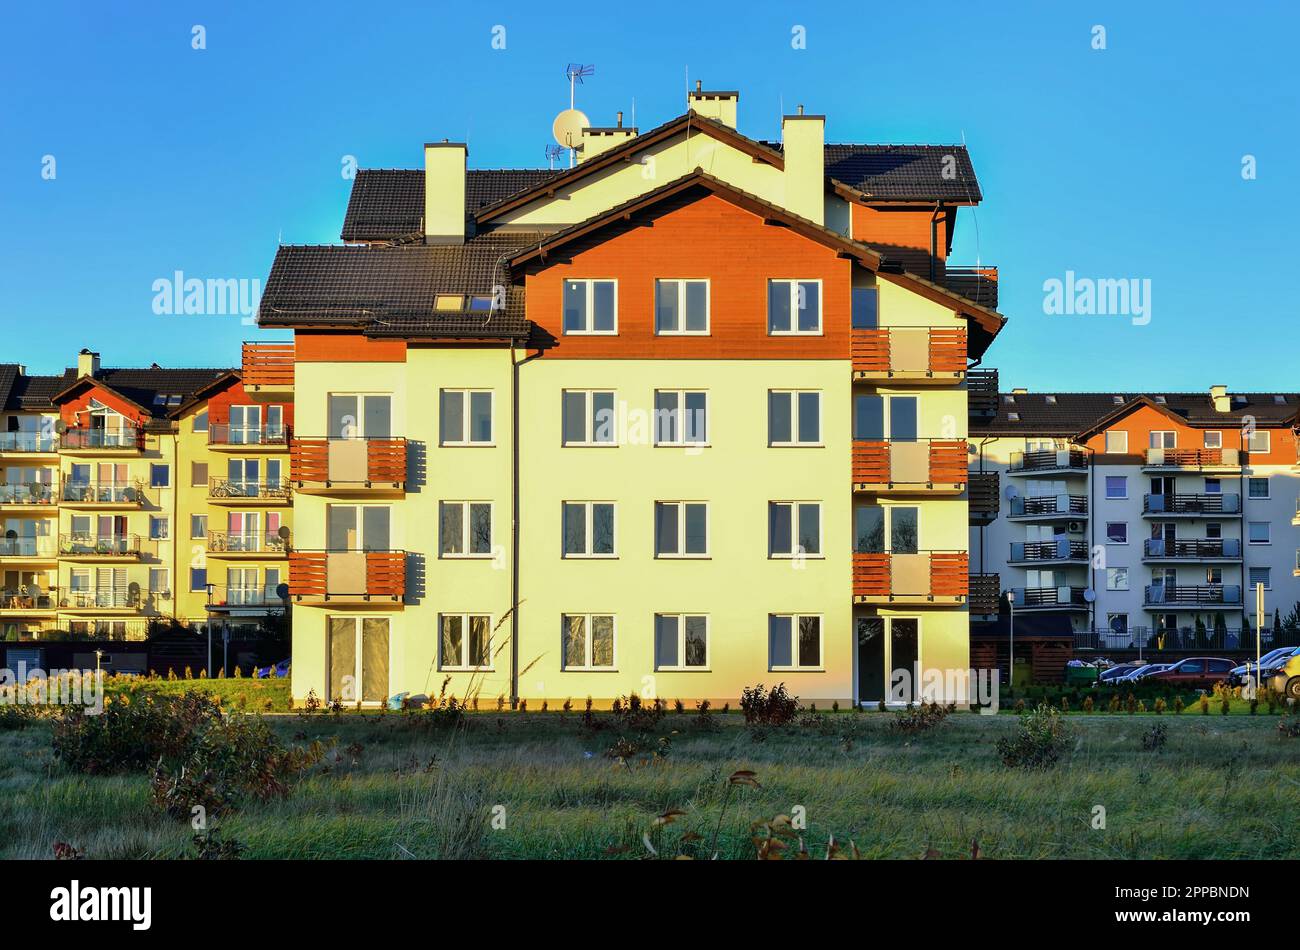 New housing estates in Poland. Public view of newly built block of flats in green area. Photo taken in Tychy, Poland. Stock Photo